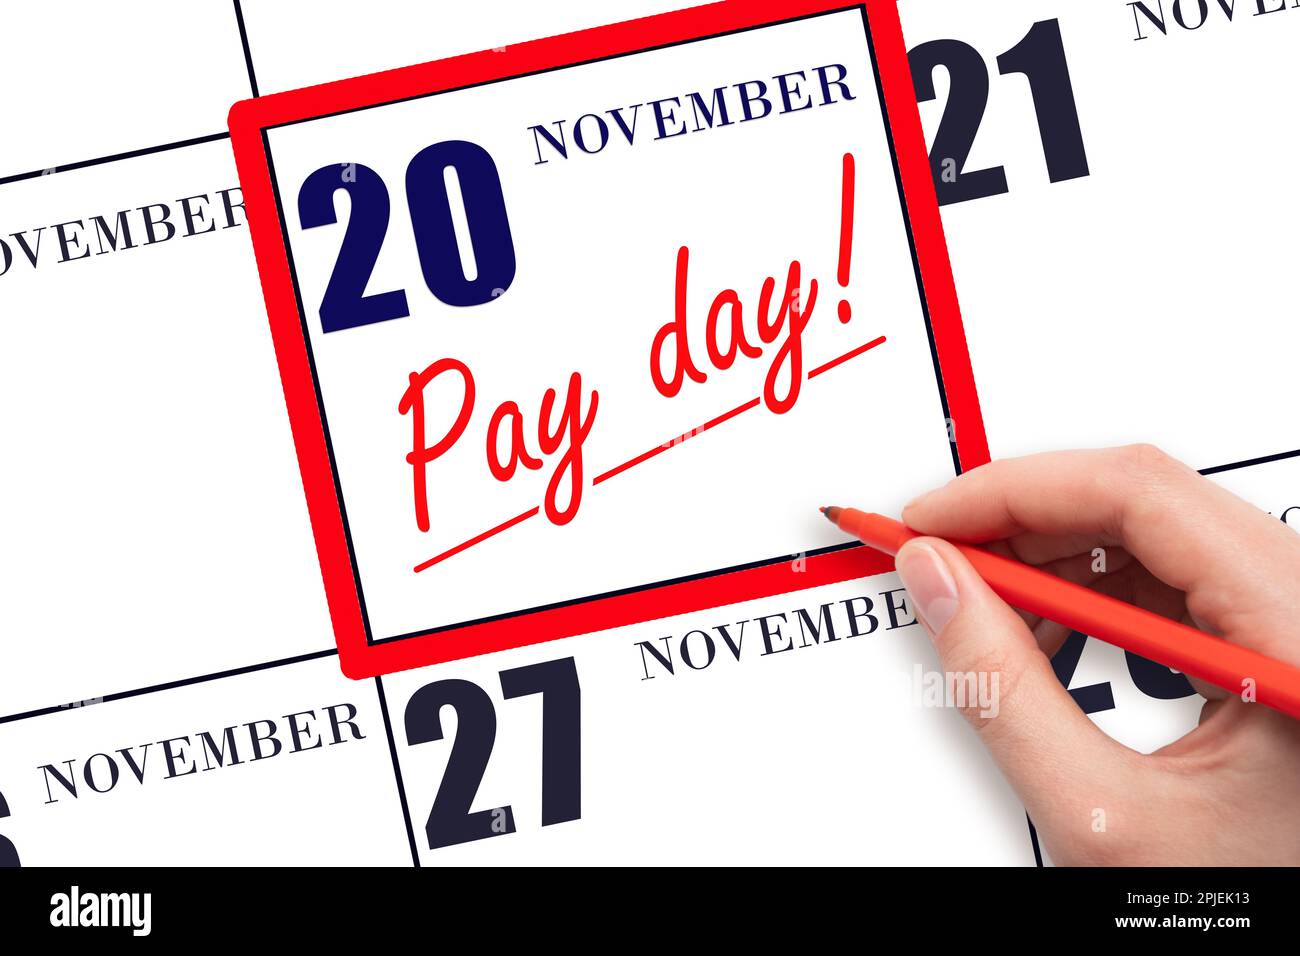 20th day of November. Hand writing text PAY DATE on calendar date November 20 and underline it. Payment due date. Reminder concept of payment. Autumn Stock Photo